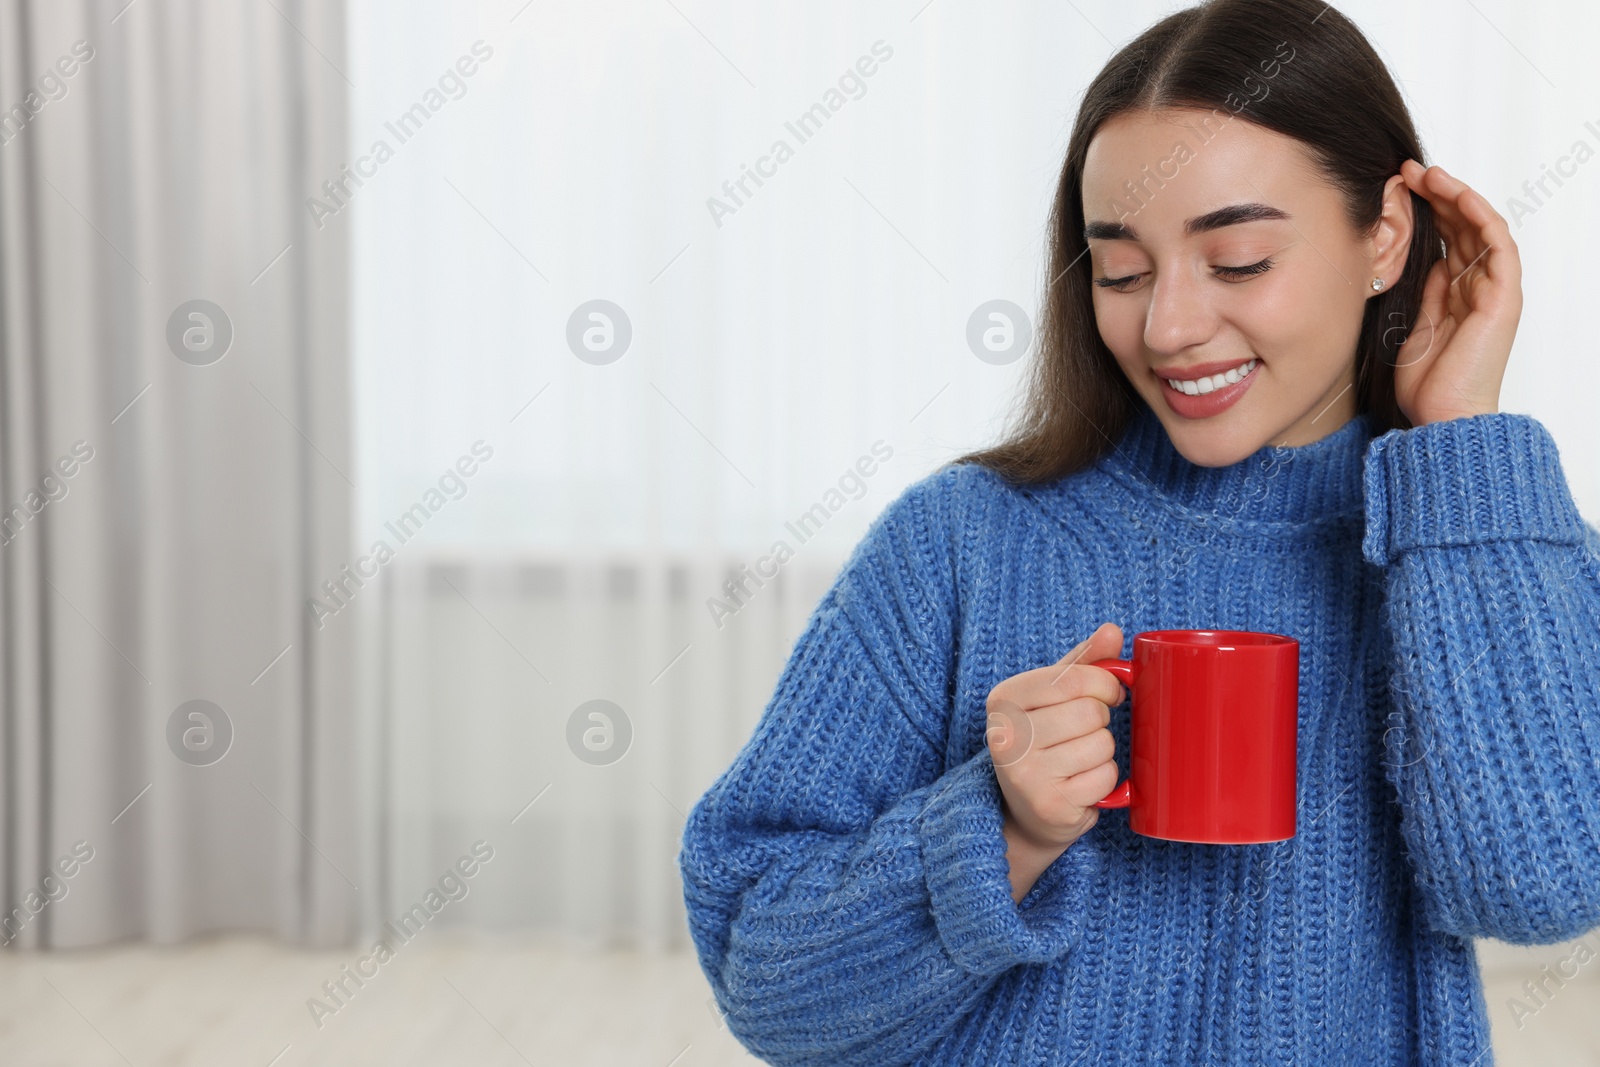 Photo of Happy young woman holding red ceramic mug at home, space for text